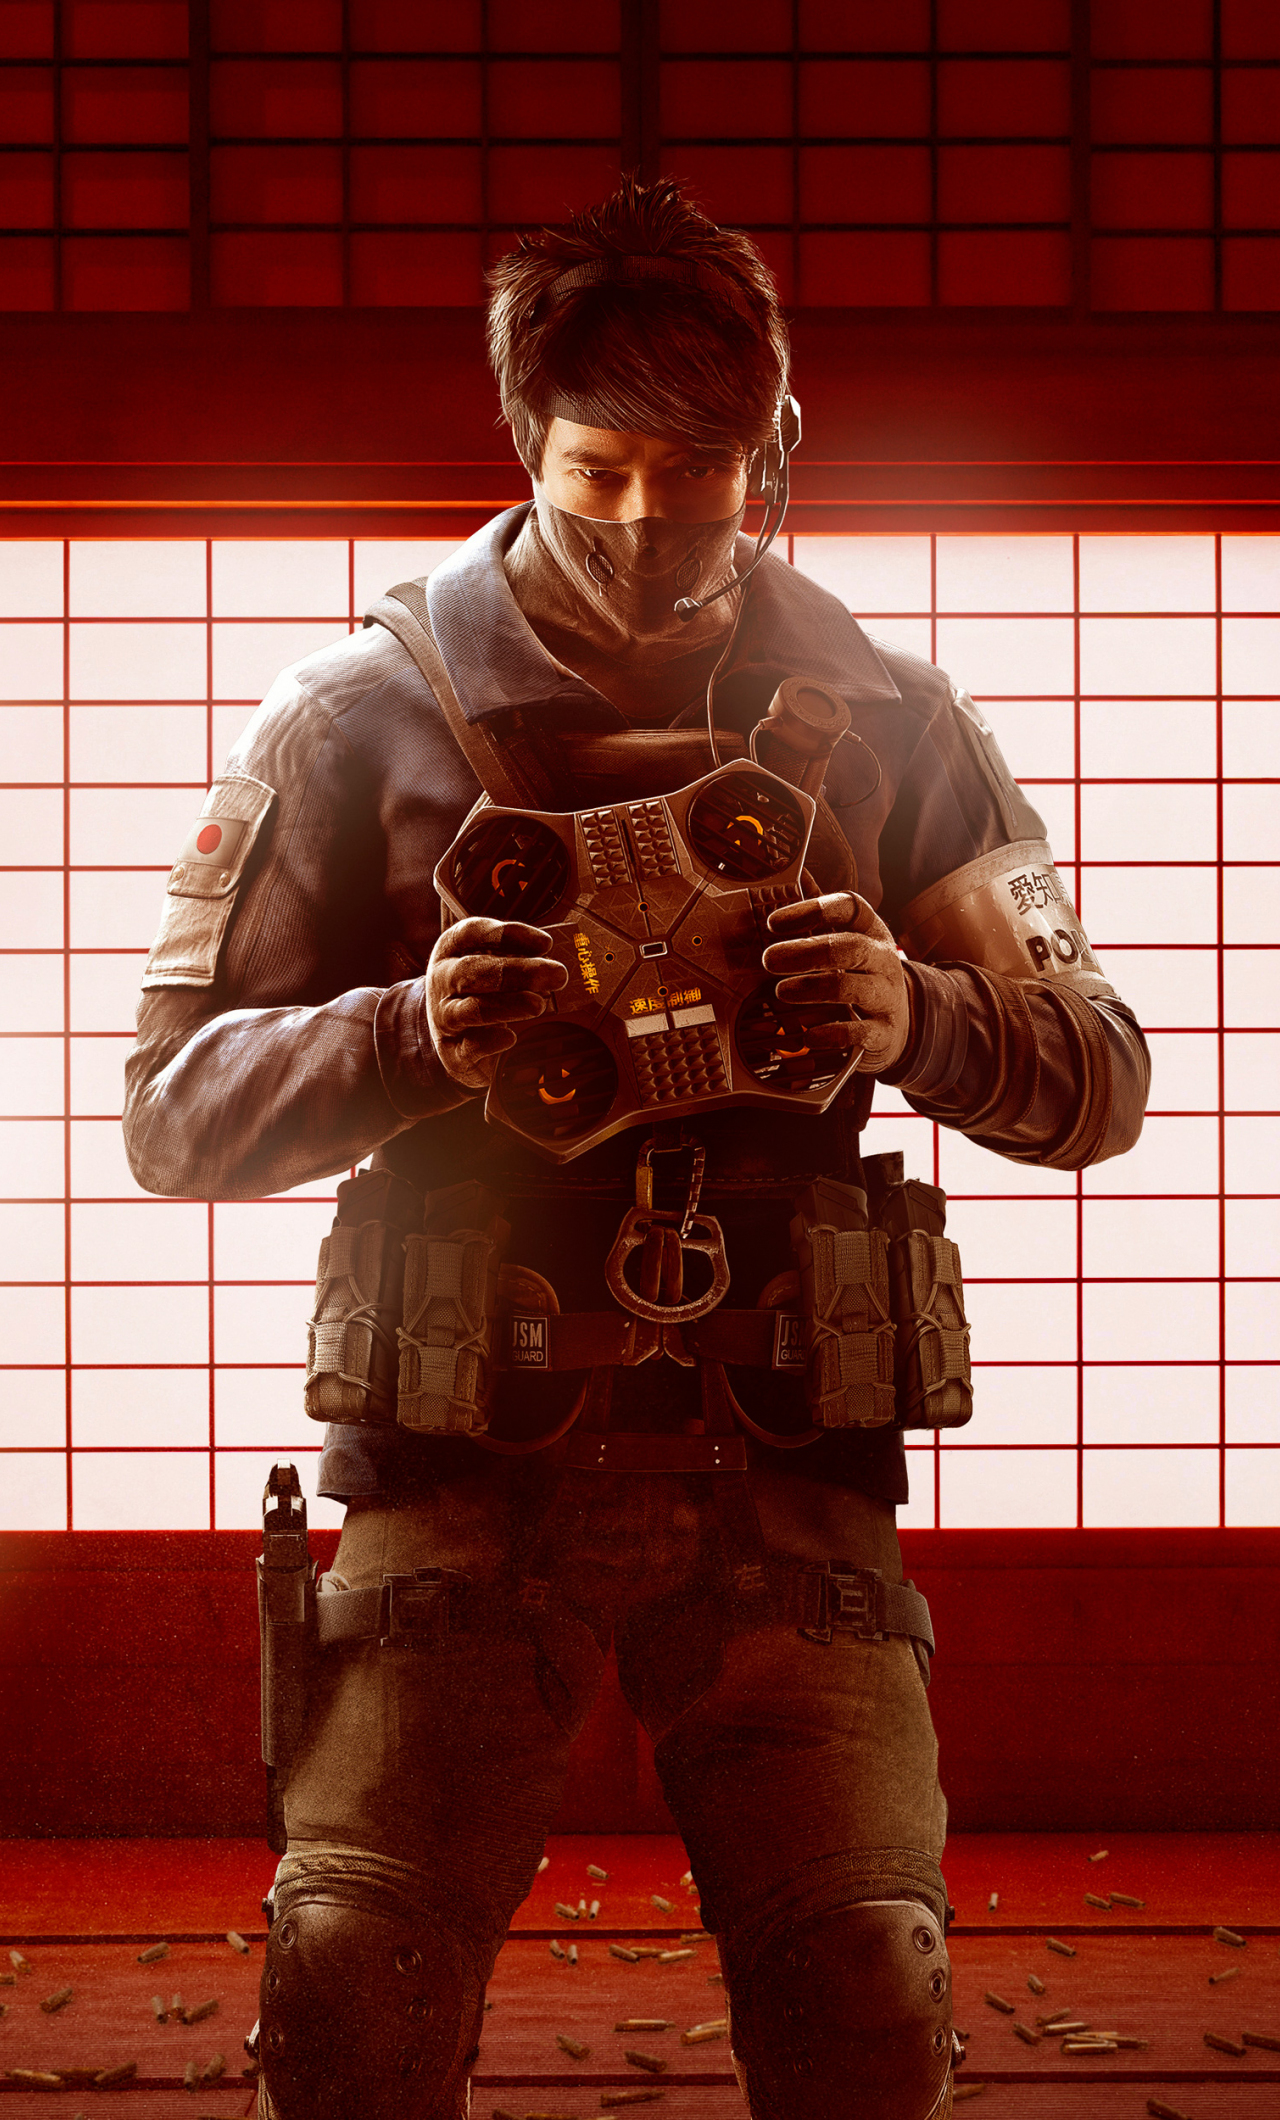 Download 1280x2120 Wallpaper Echo Tom Clancy S Rainbow Six Siege Game Iphone 6 Plus 1280x2120 Hd Image Background 851